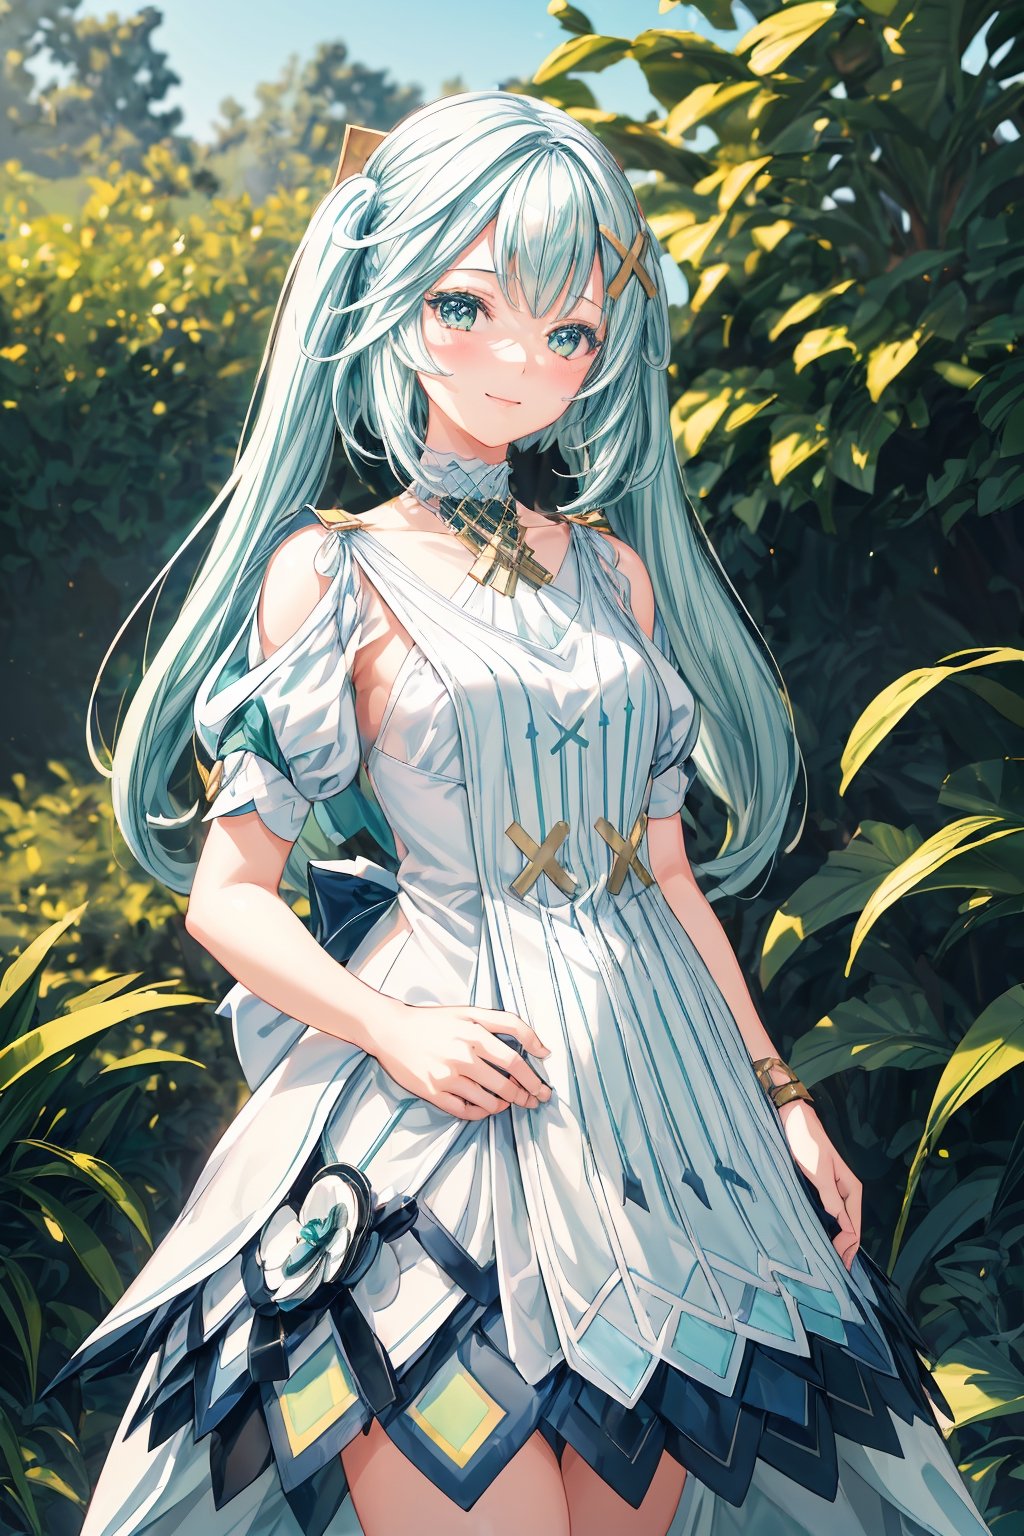 1 girl, faruzandef, beautiful smile, wear maid outfits, outdoor, hands behind back, masterpiece, best quality, (extremely detailed CG unity 8k wallpaper, masterpiece, best quality, ultra-detailed, best shadow), (detailed background), portrait, High contrast, realistic, perfect light,FARUZANRND